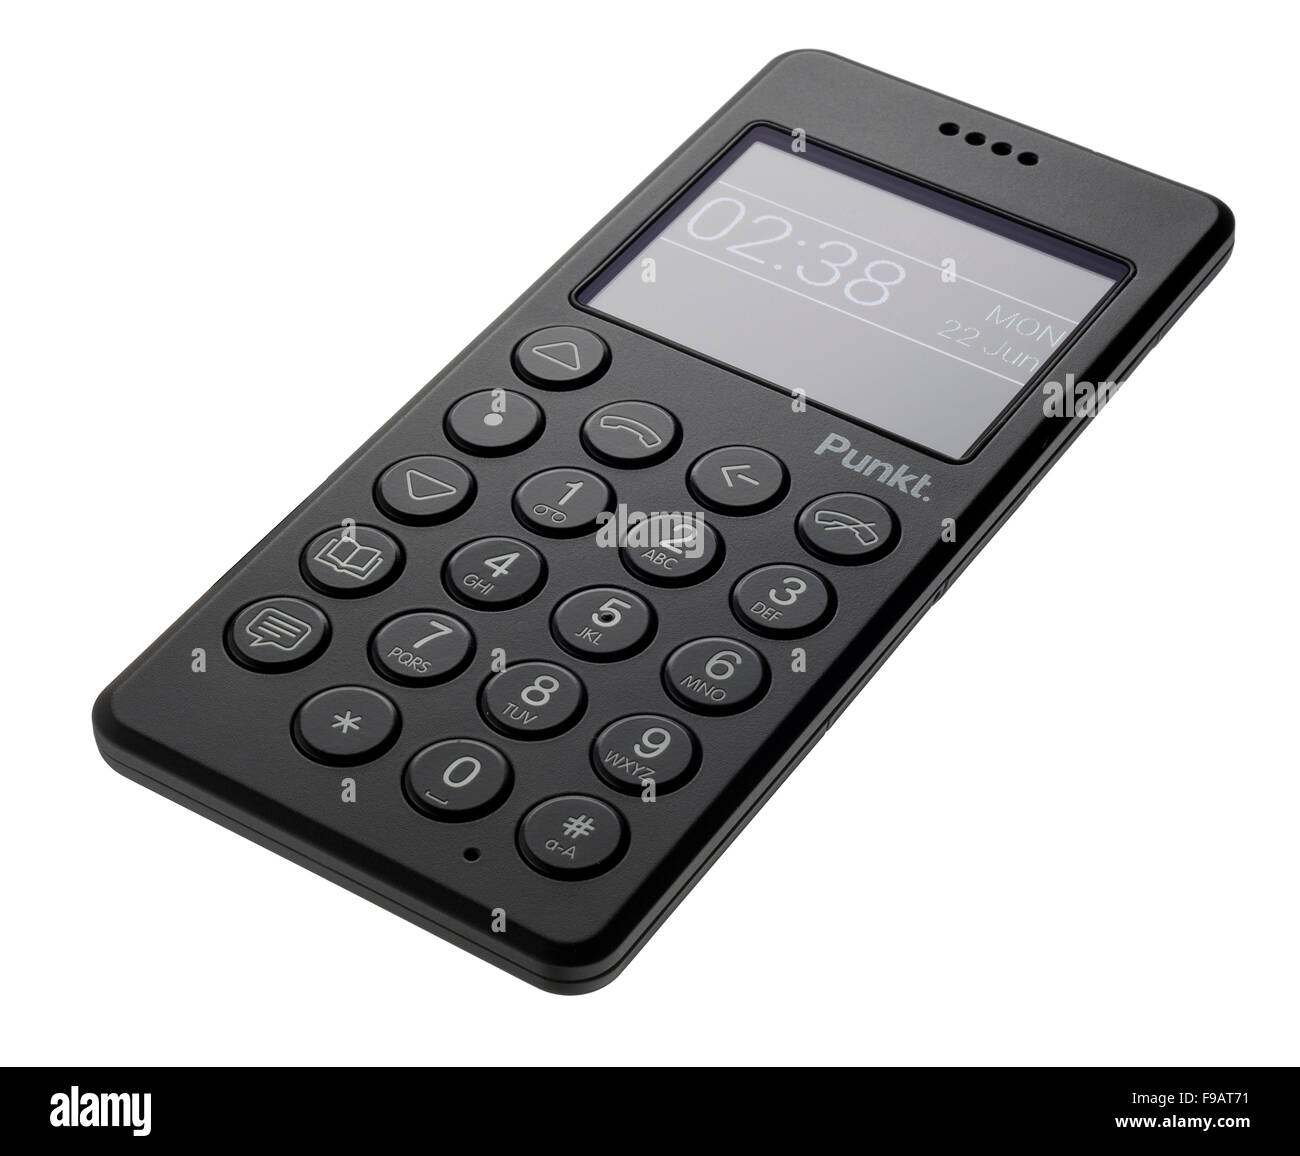 Punkt. phone. Mobile phone that just does texts and phone calls. Basic cellphone with no other distractions. Stock Photo